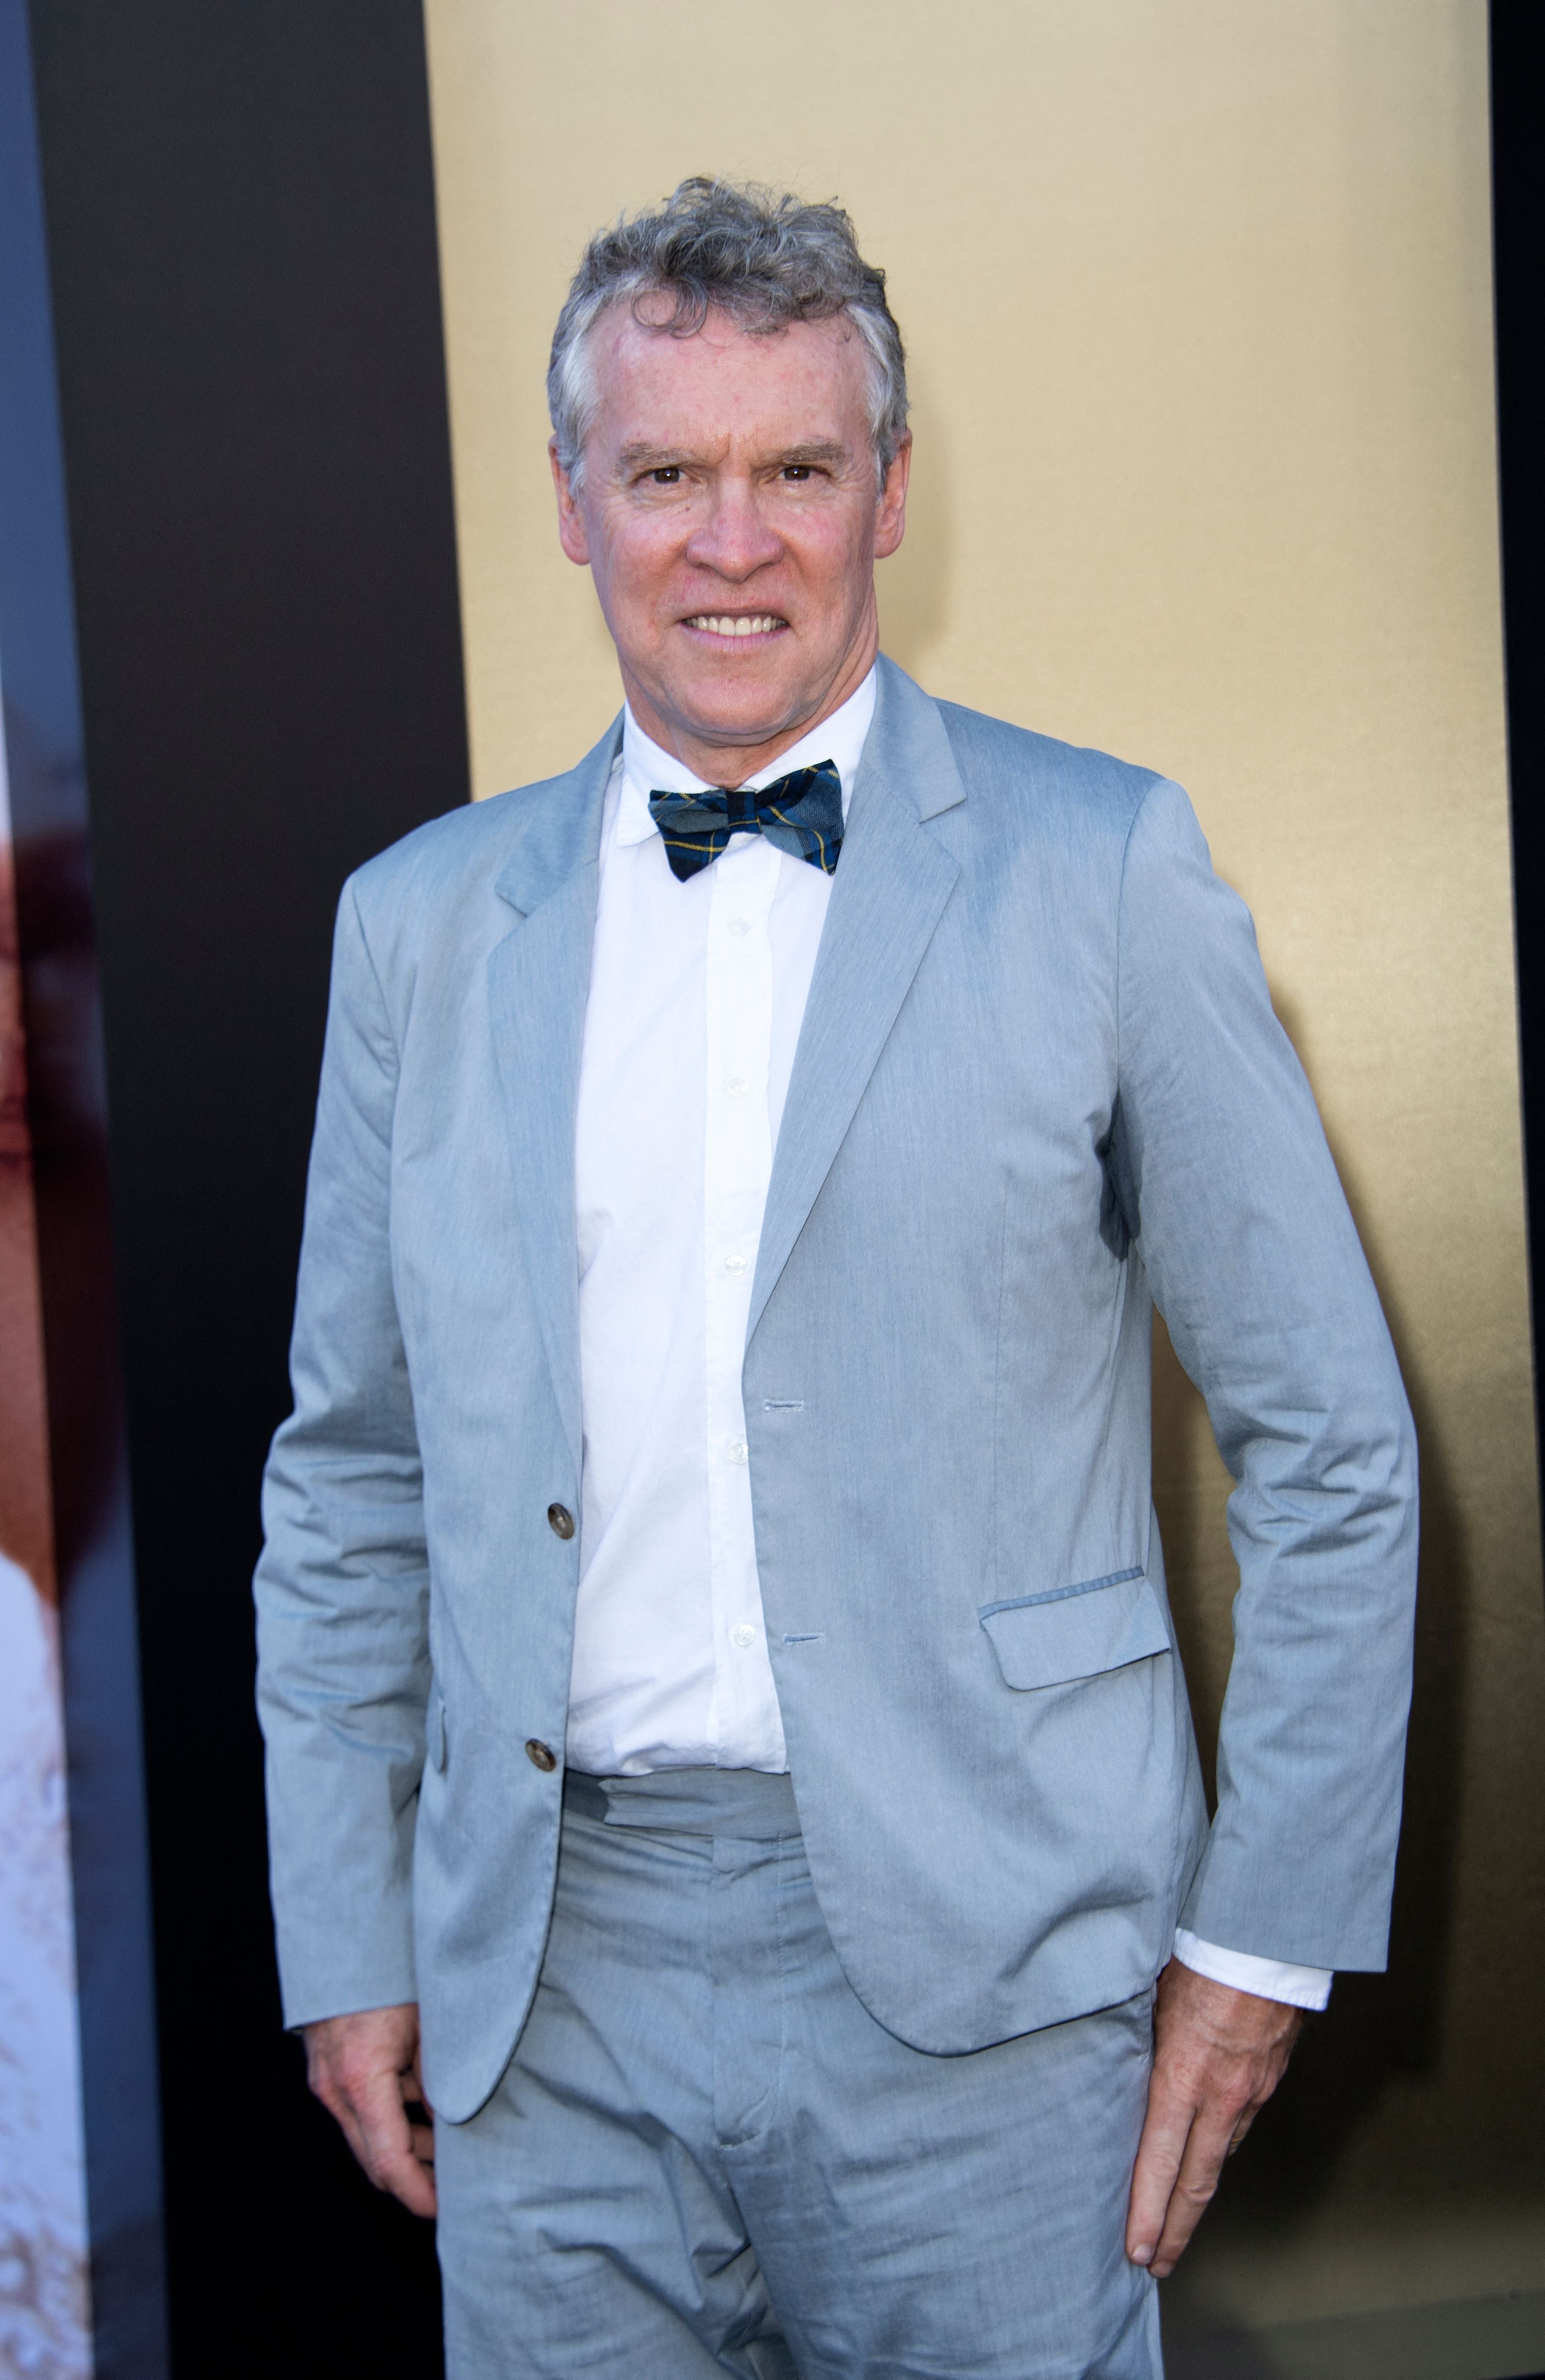 Tate Donovan at the premiere of "Respect" in Westwood, California on August 8, 2021 | Source: Getty Images